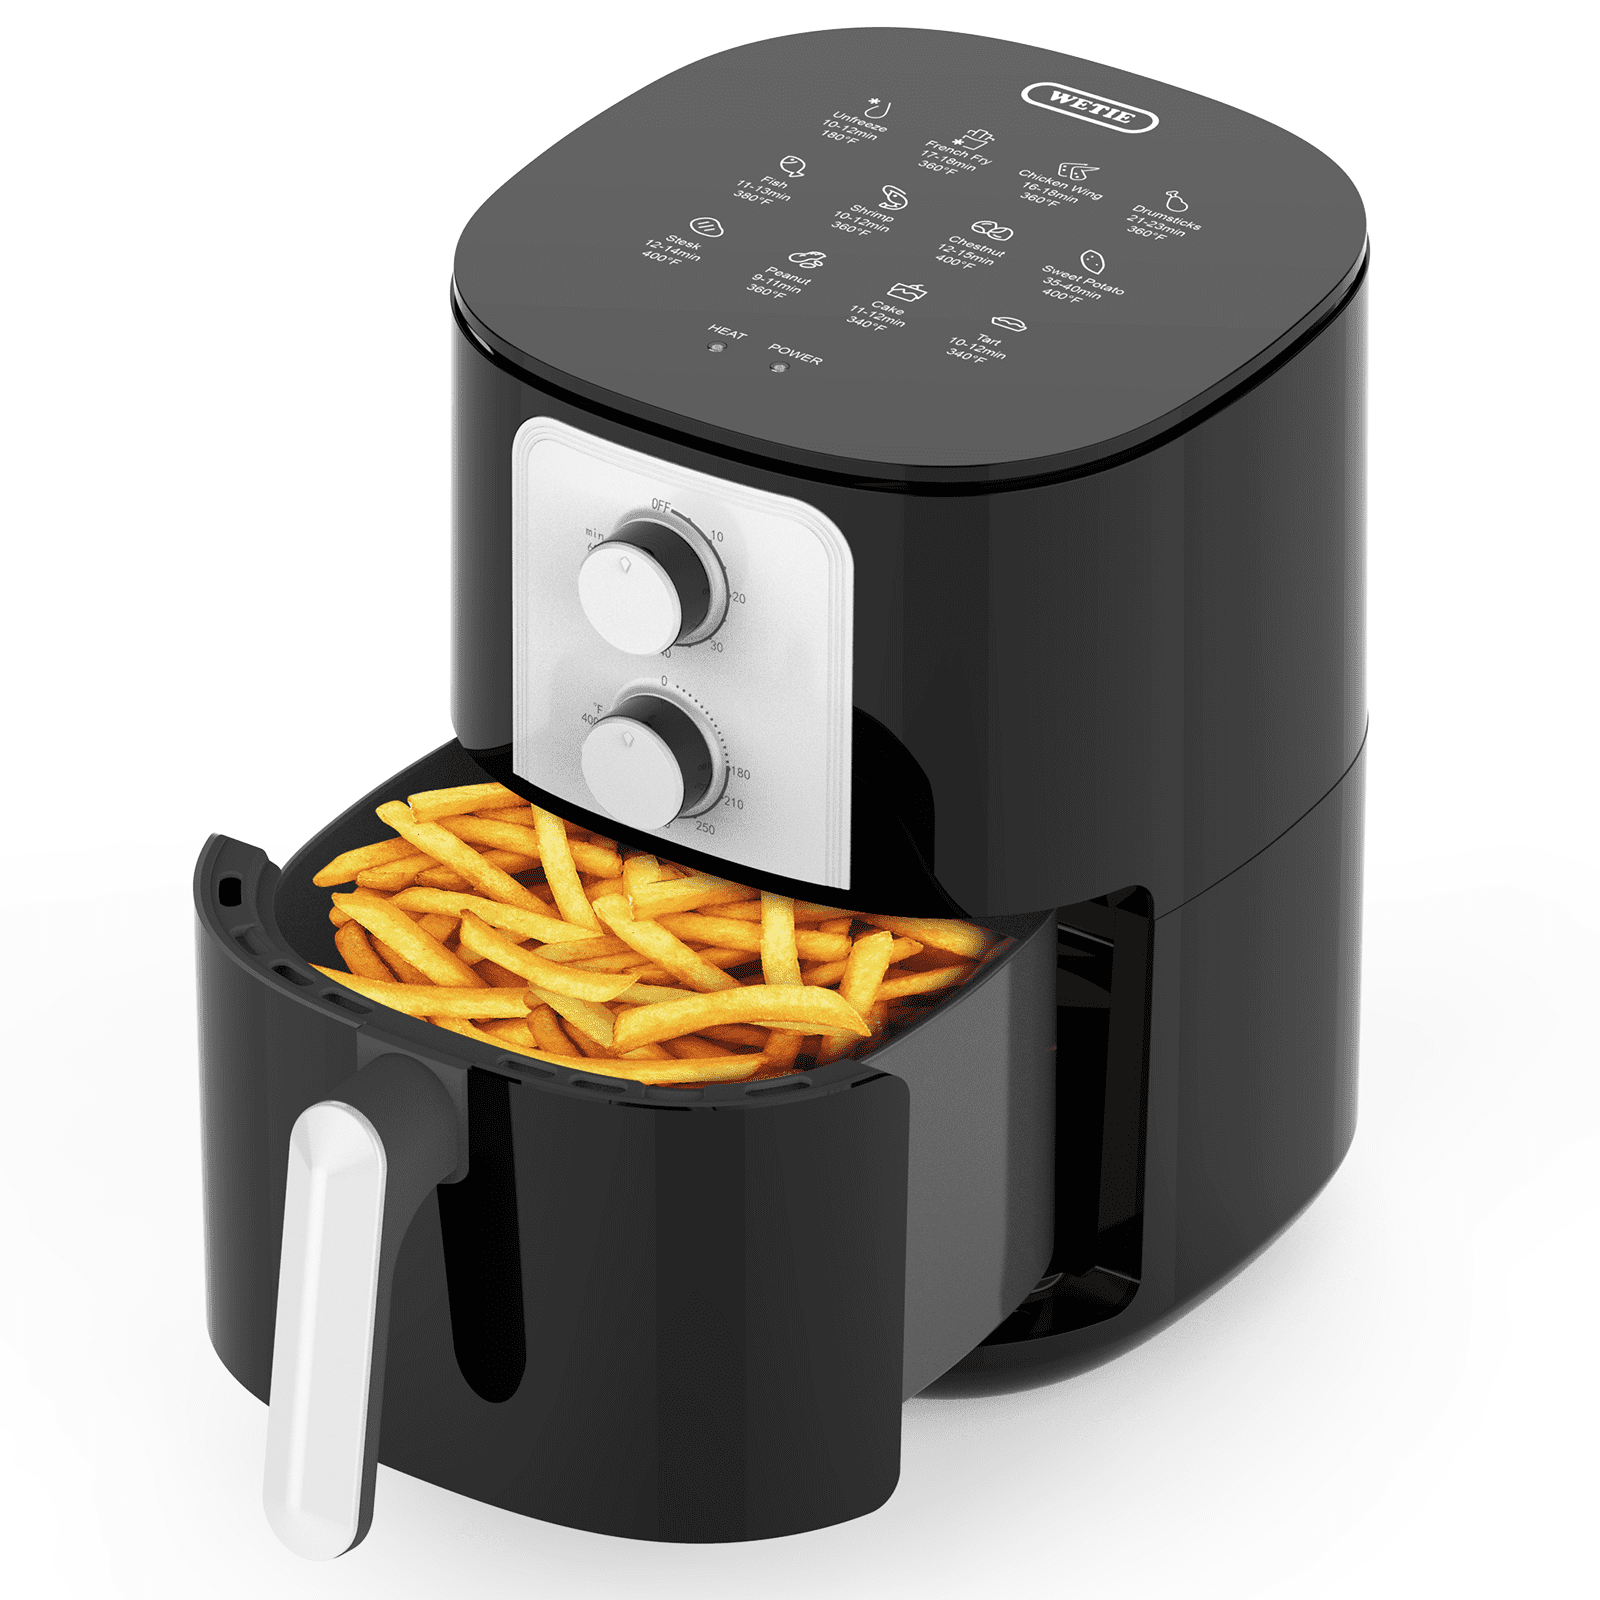 WETIE Air Fryer, 4QT 1400W Airfryer, 5-in-I, 176°F to 400ºF, Overheat  Protection, Easy Cleaning